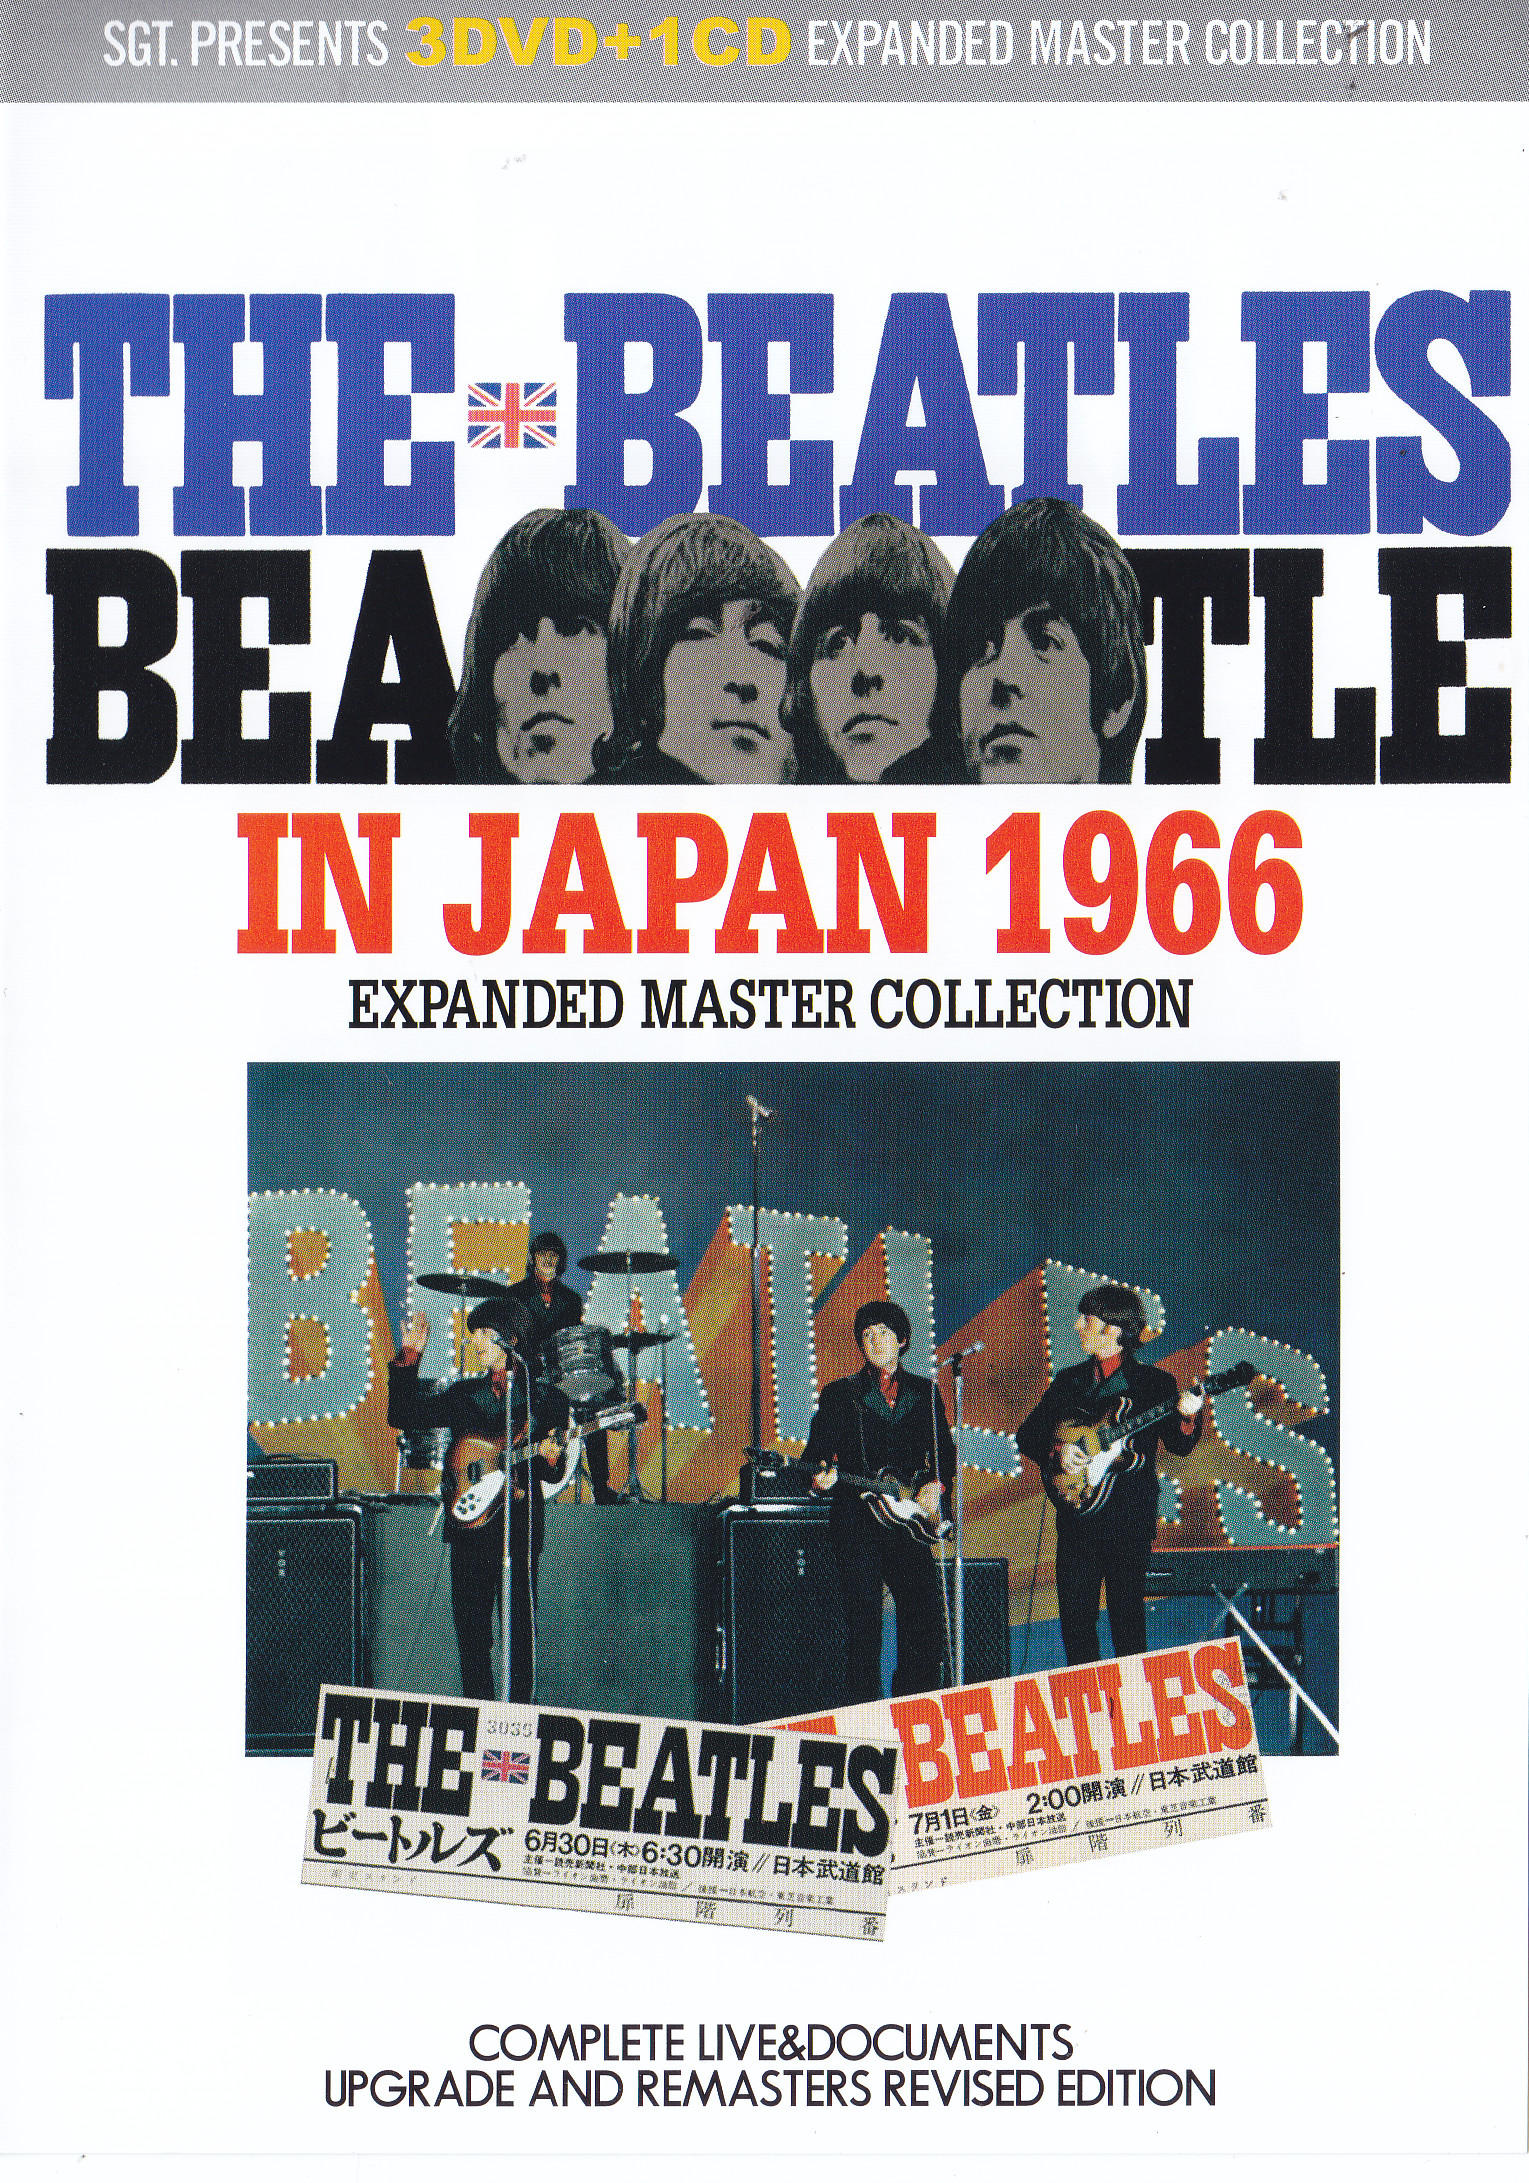 Beatles / In Japan 1966 Expanded Master Collection / 3DVD+1CD ...